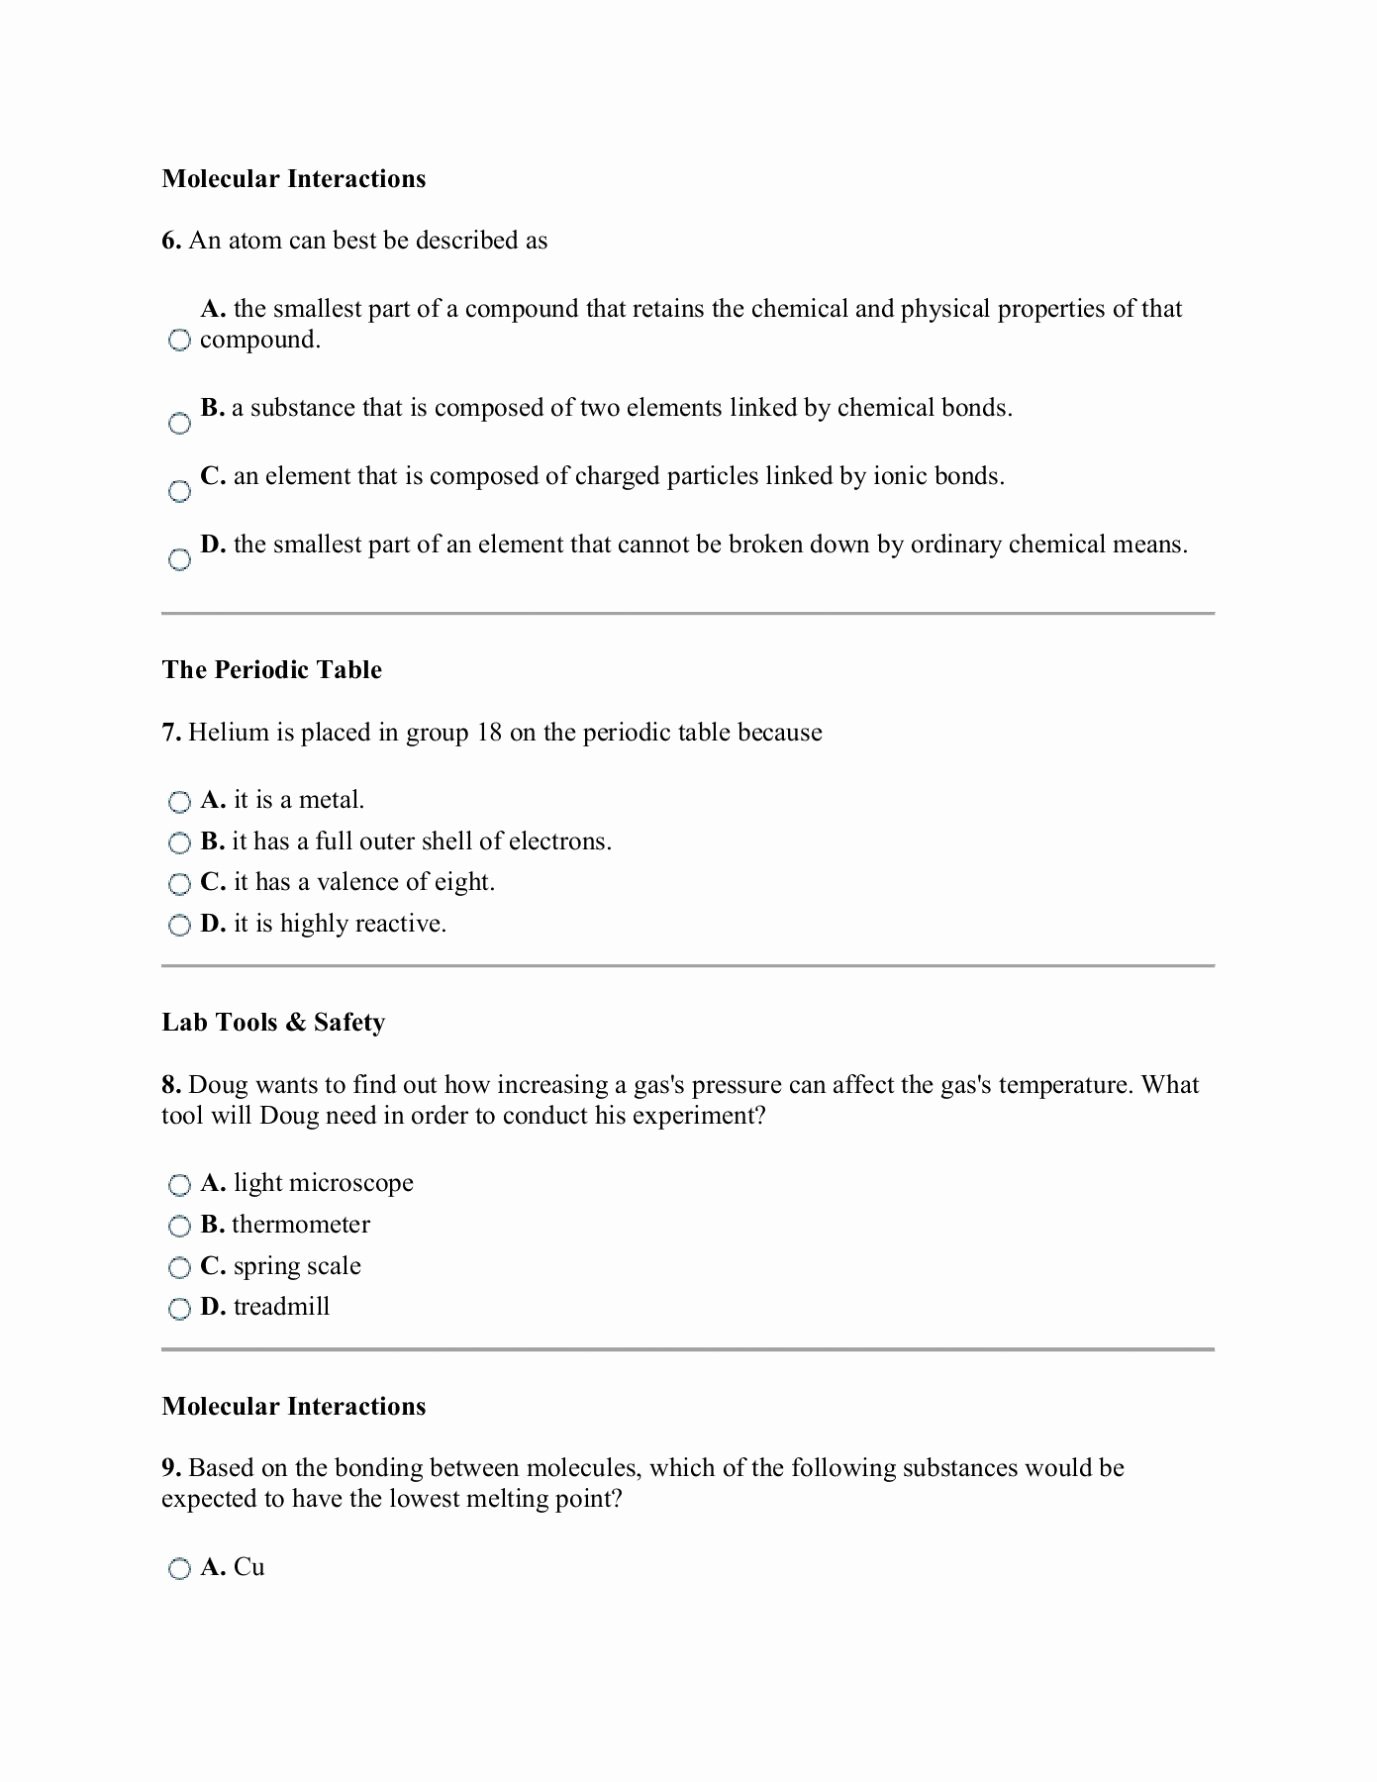 Chemistry Review Worksheet Answers Inspirational Chemical Bonding Review Worksheet Answers